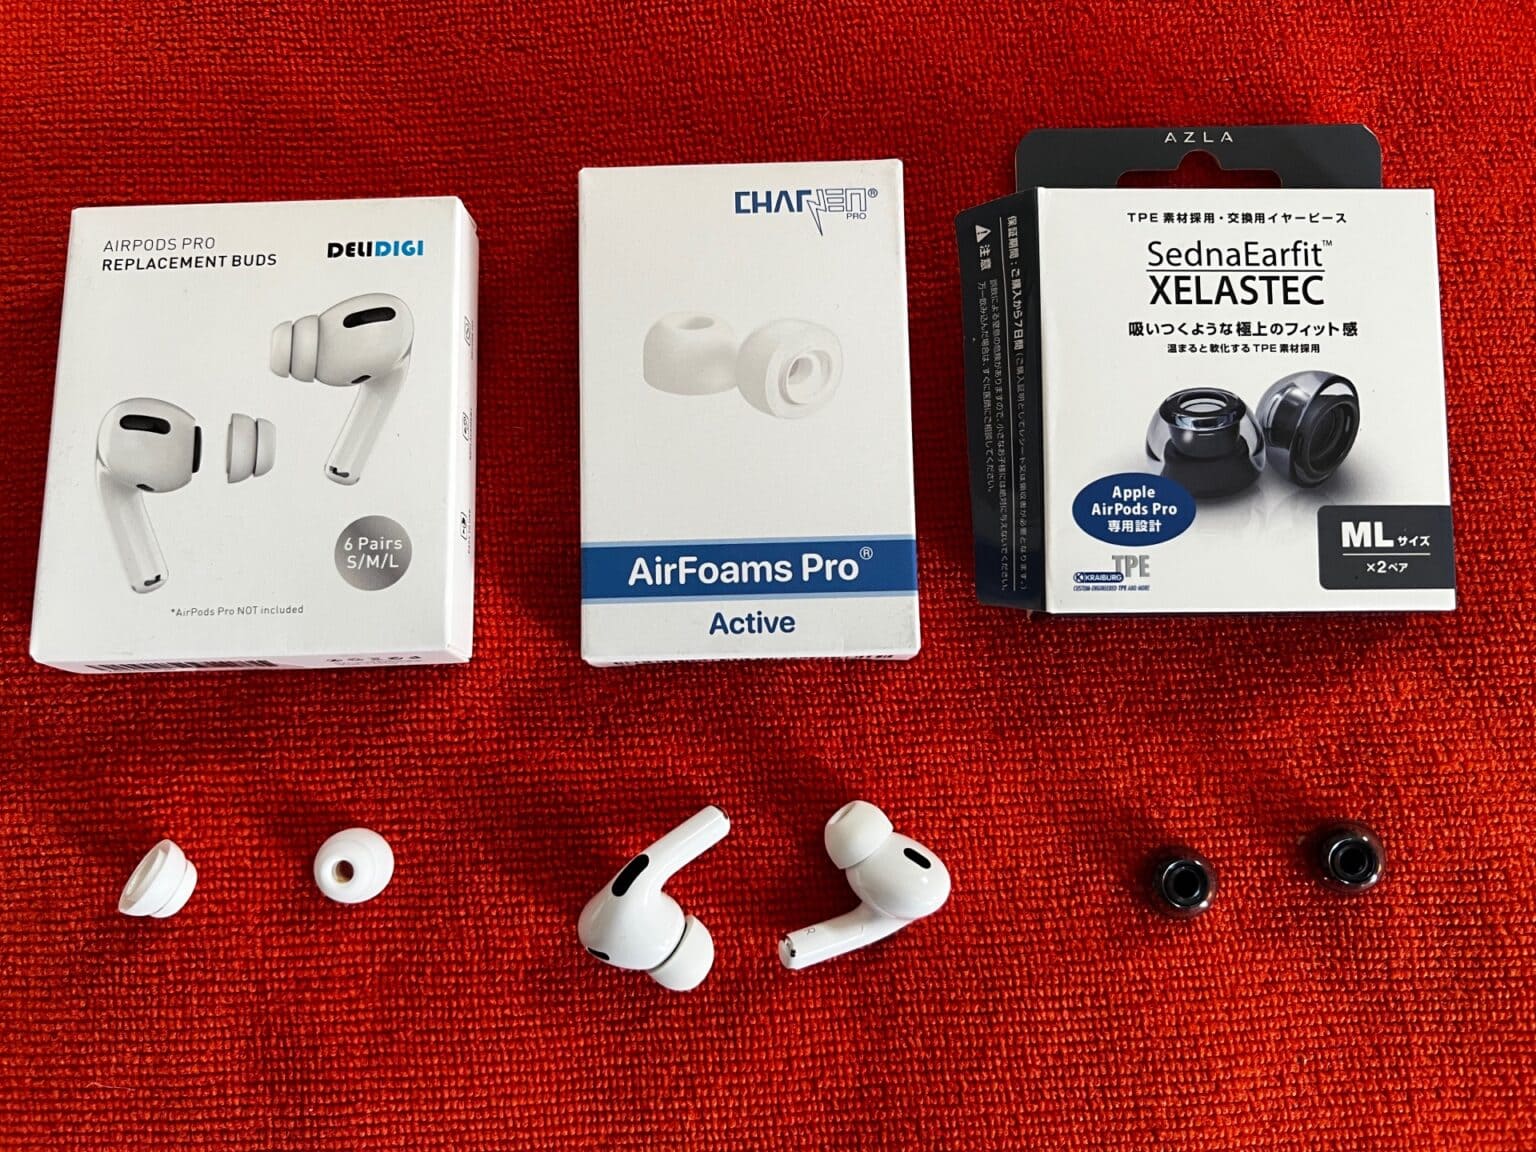 A poor AirPods Pro 2 fit is troubling, but it's not hard to fix with after-market ear tips.